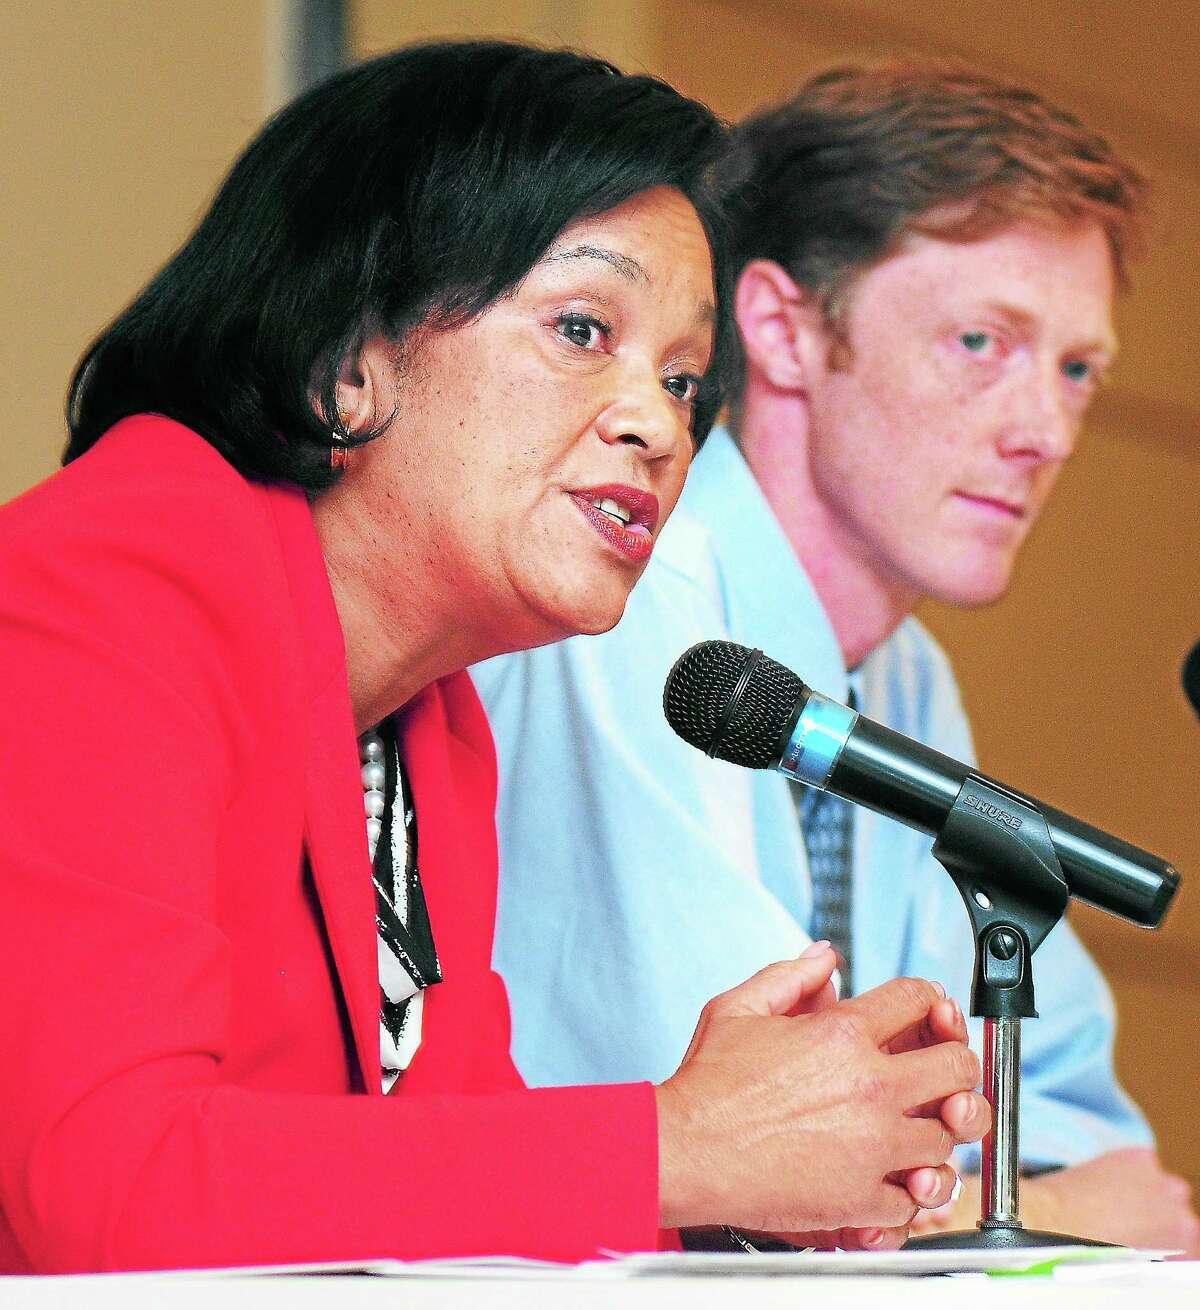 (Arnold Gold — New Haven Register) New Haven mayoral candidate Toni Harp (left) answers a question during a debate with Justin Elicker (right) at Gateway Community College in New Haven on 10/22/2013.